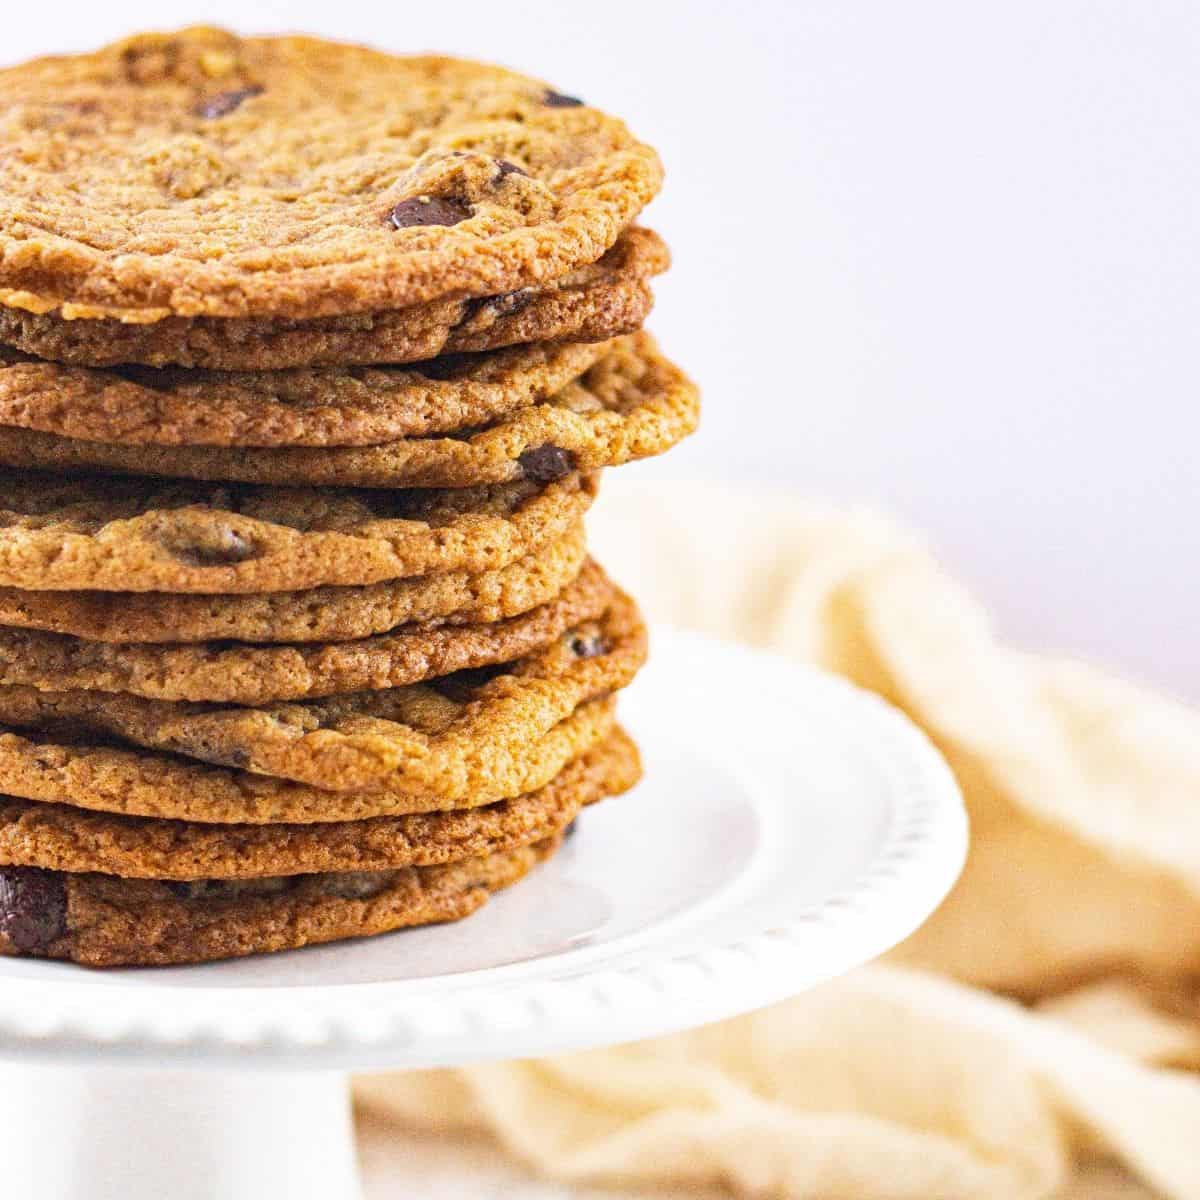 The Best Vegan Chocolate Chip Cookie Recipe – chewy, chocolatey and perfect!